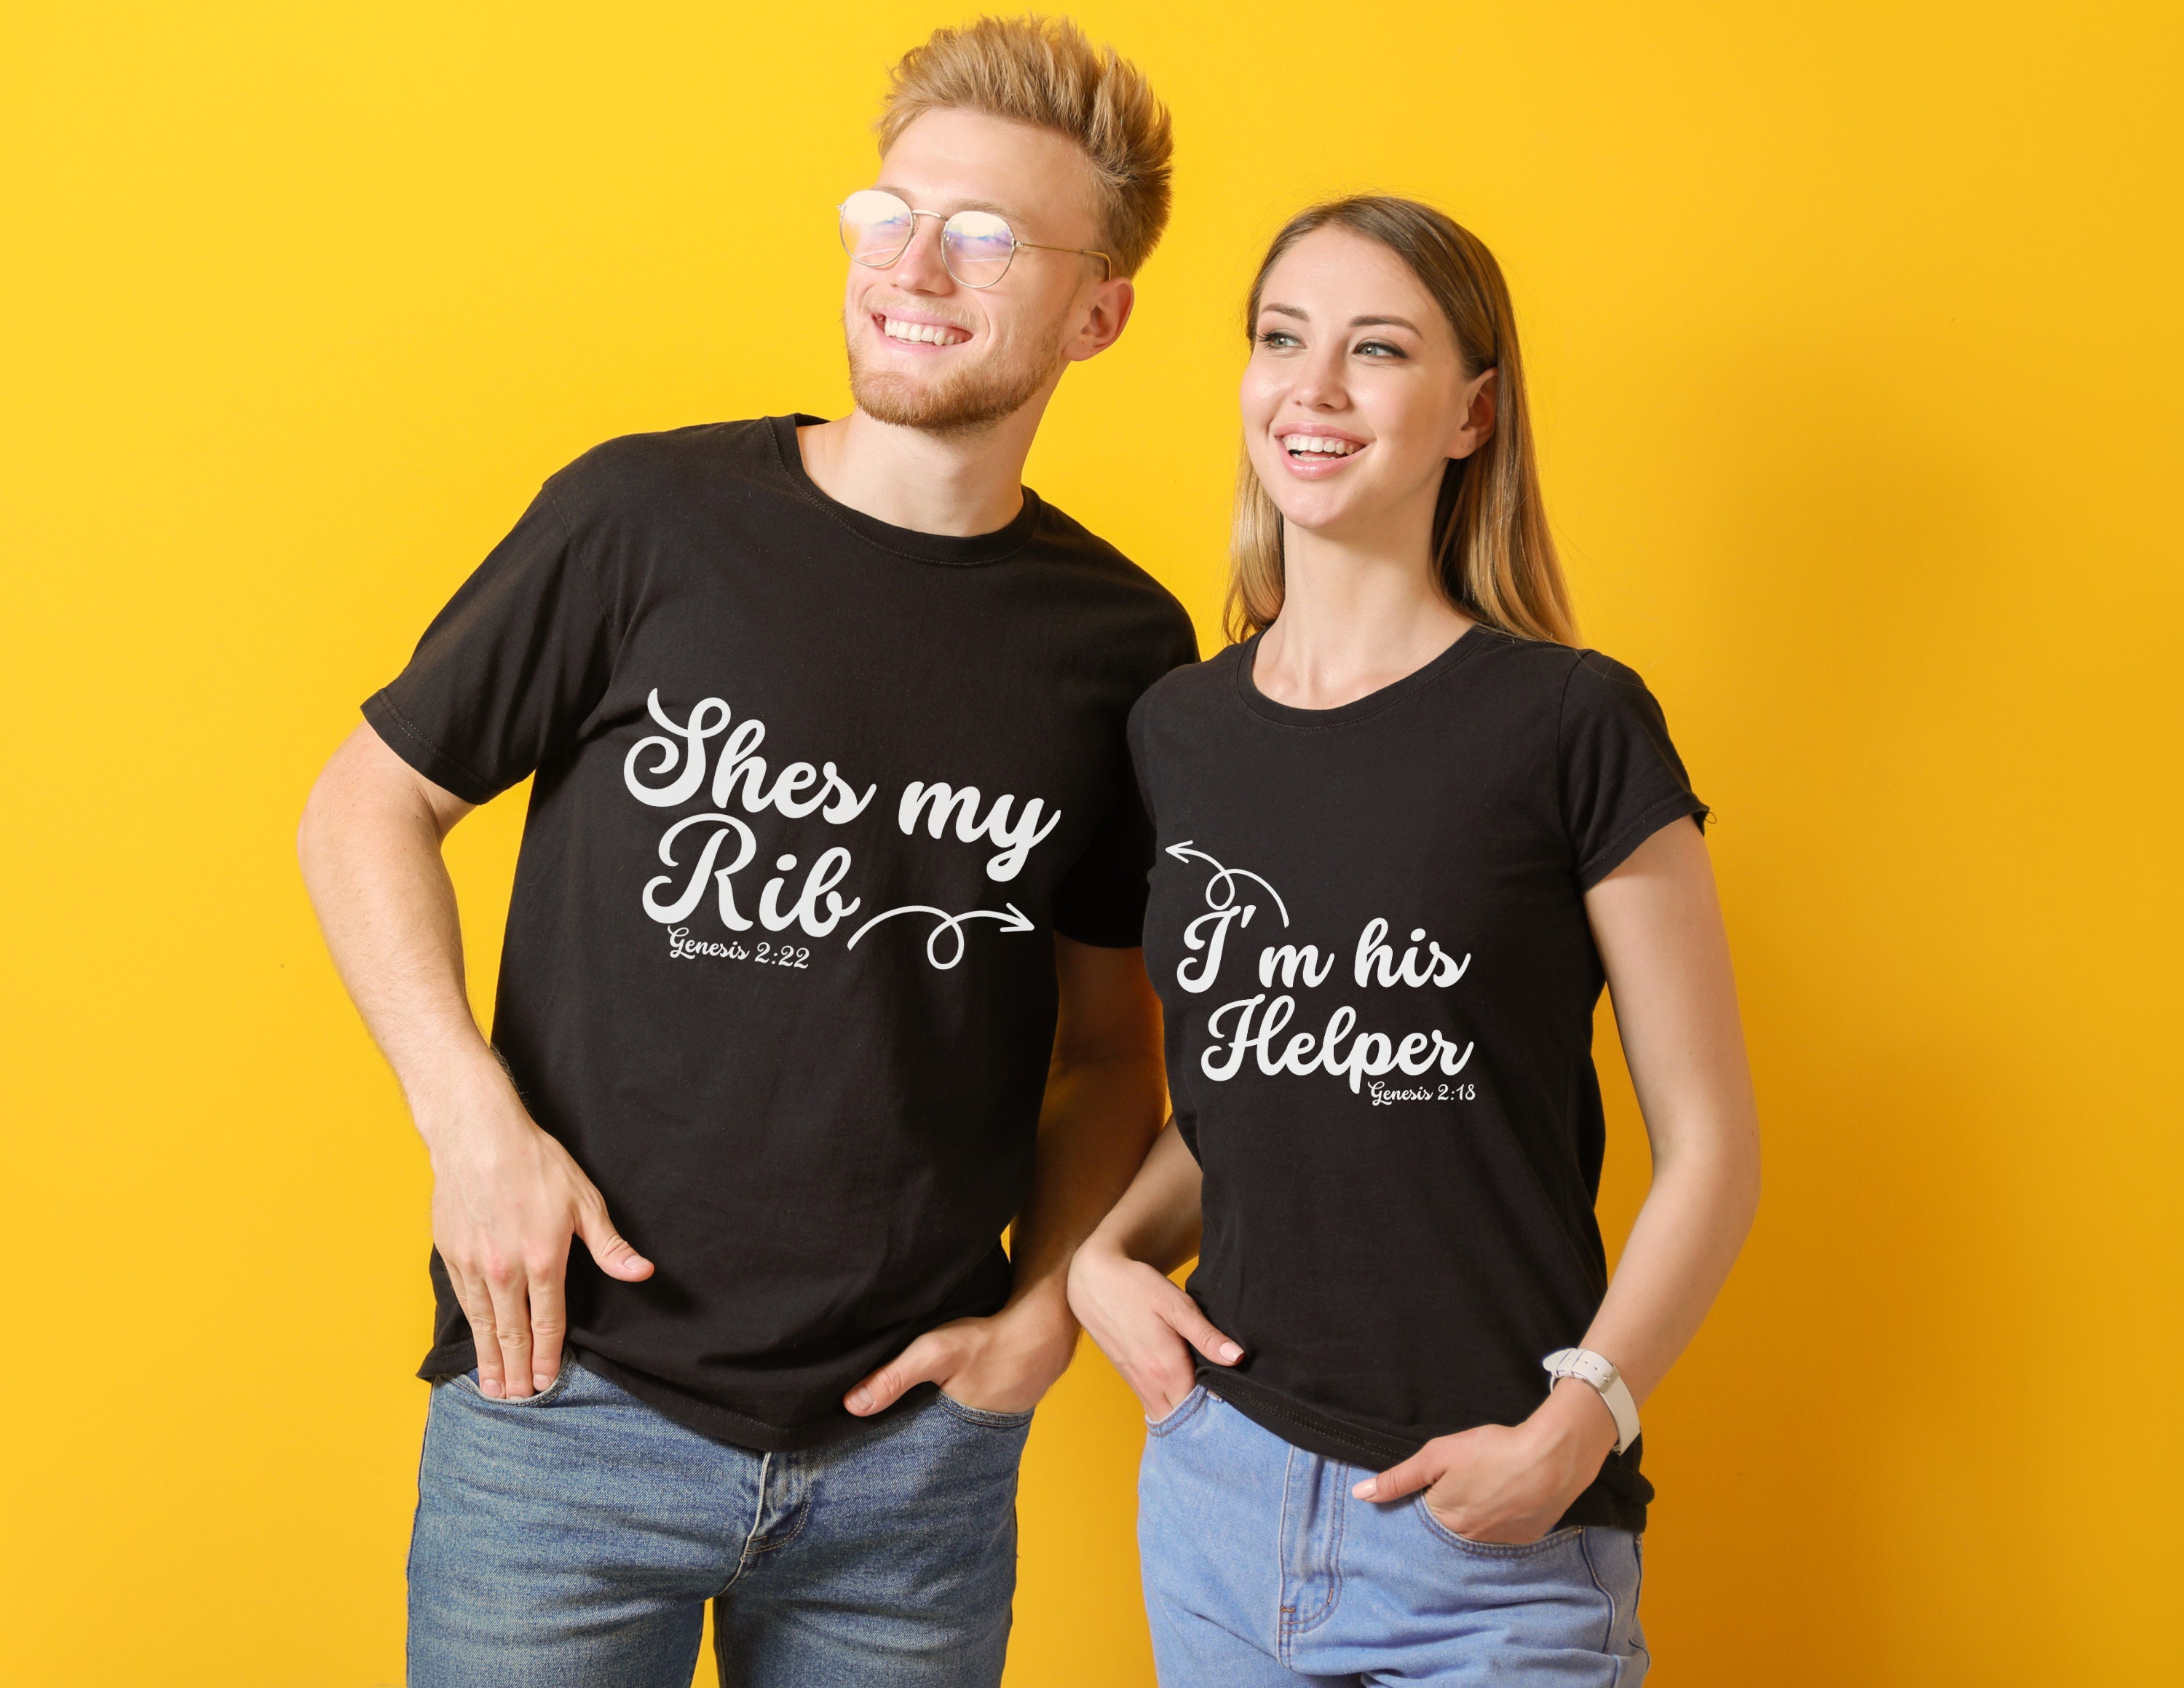 Faith Shirts Couples Who Pray Together Stay Together -Two T-shirts for One Price! Red